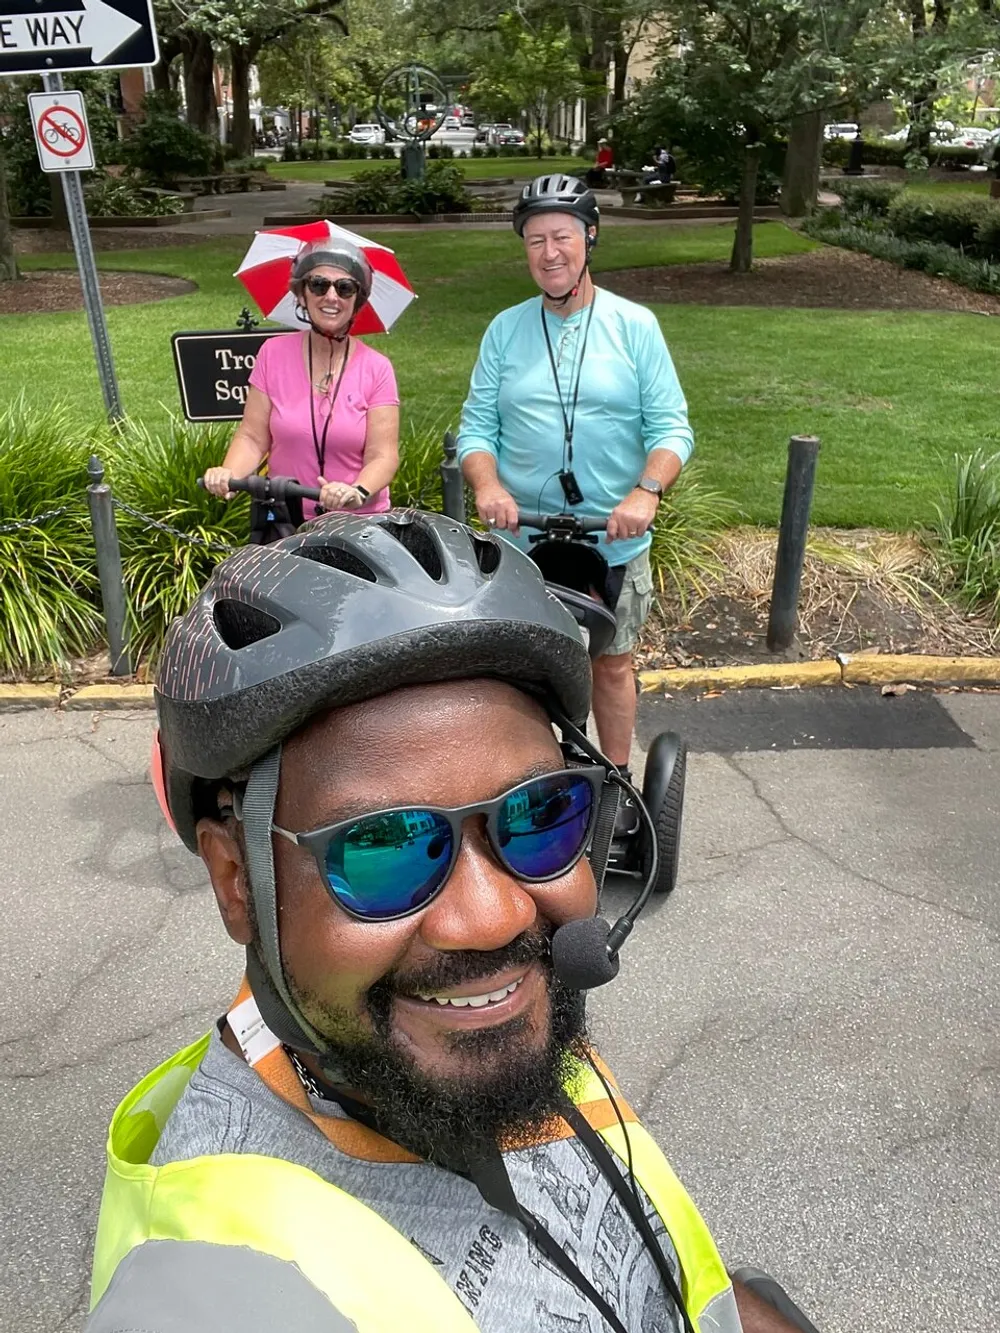 Three people are smiling for a selfie during a bicycle ride with one person wearing a helmet with a camera and the other two in the background one of whom is using a hat with an umbrella attachment